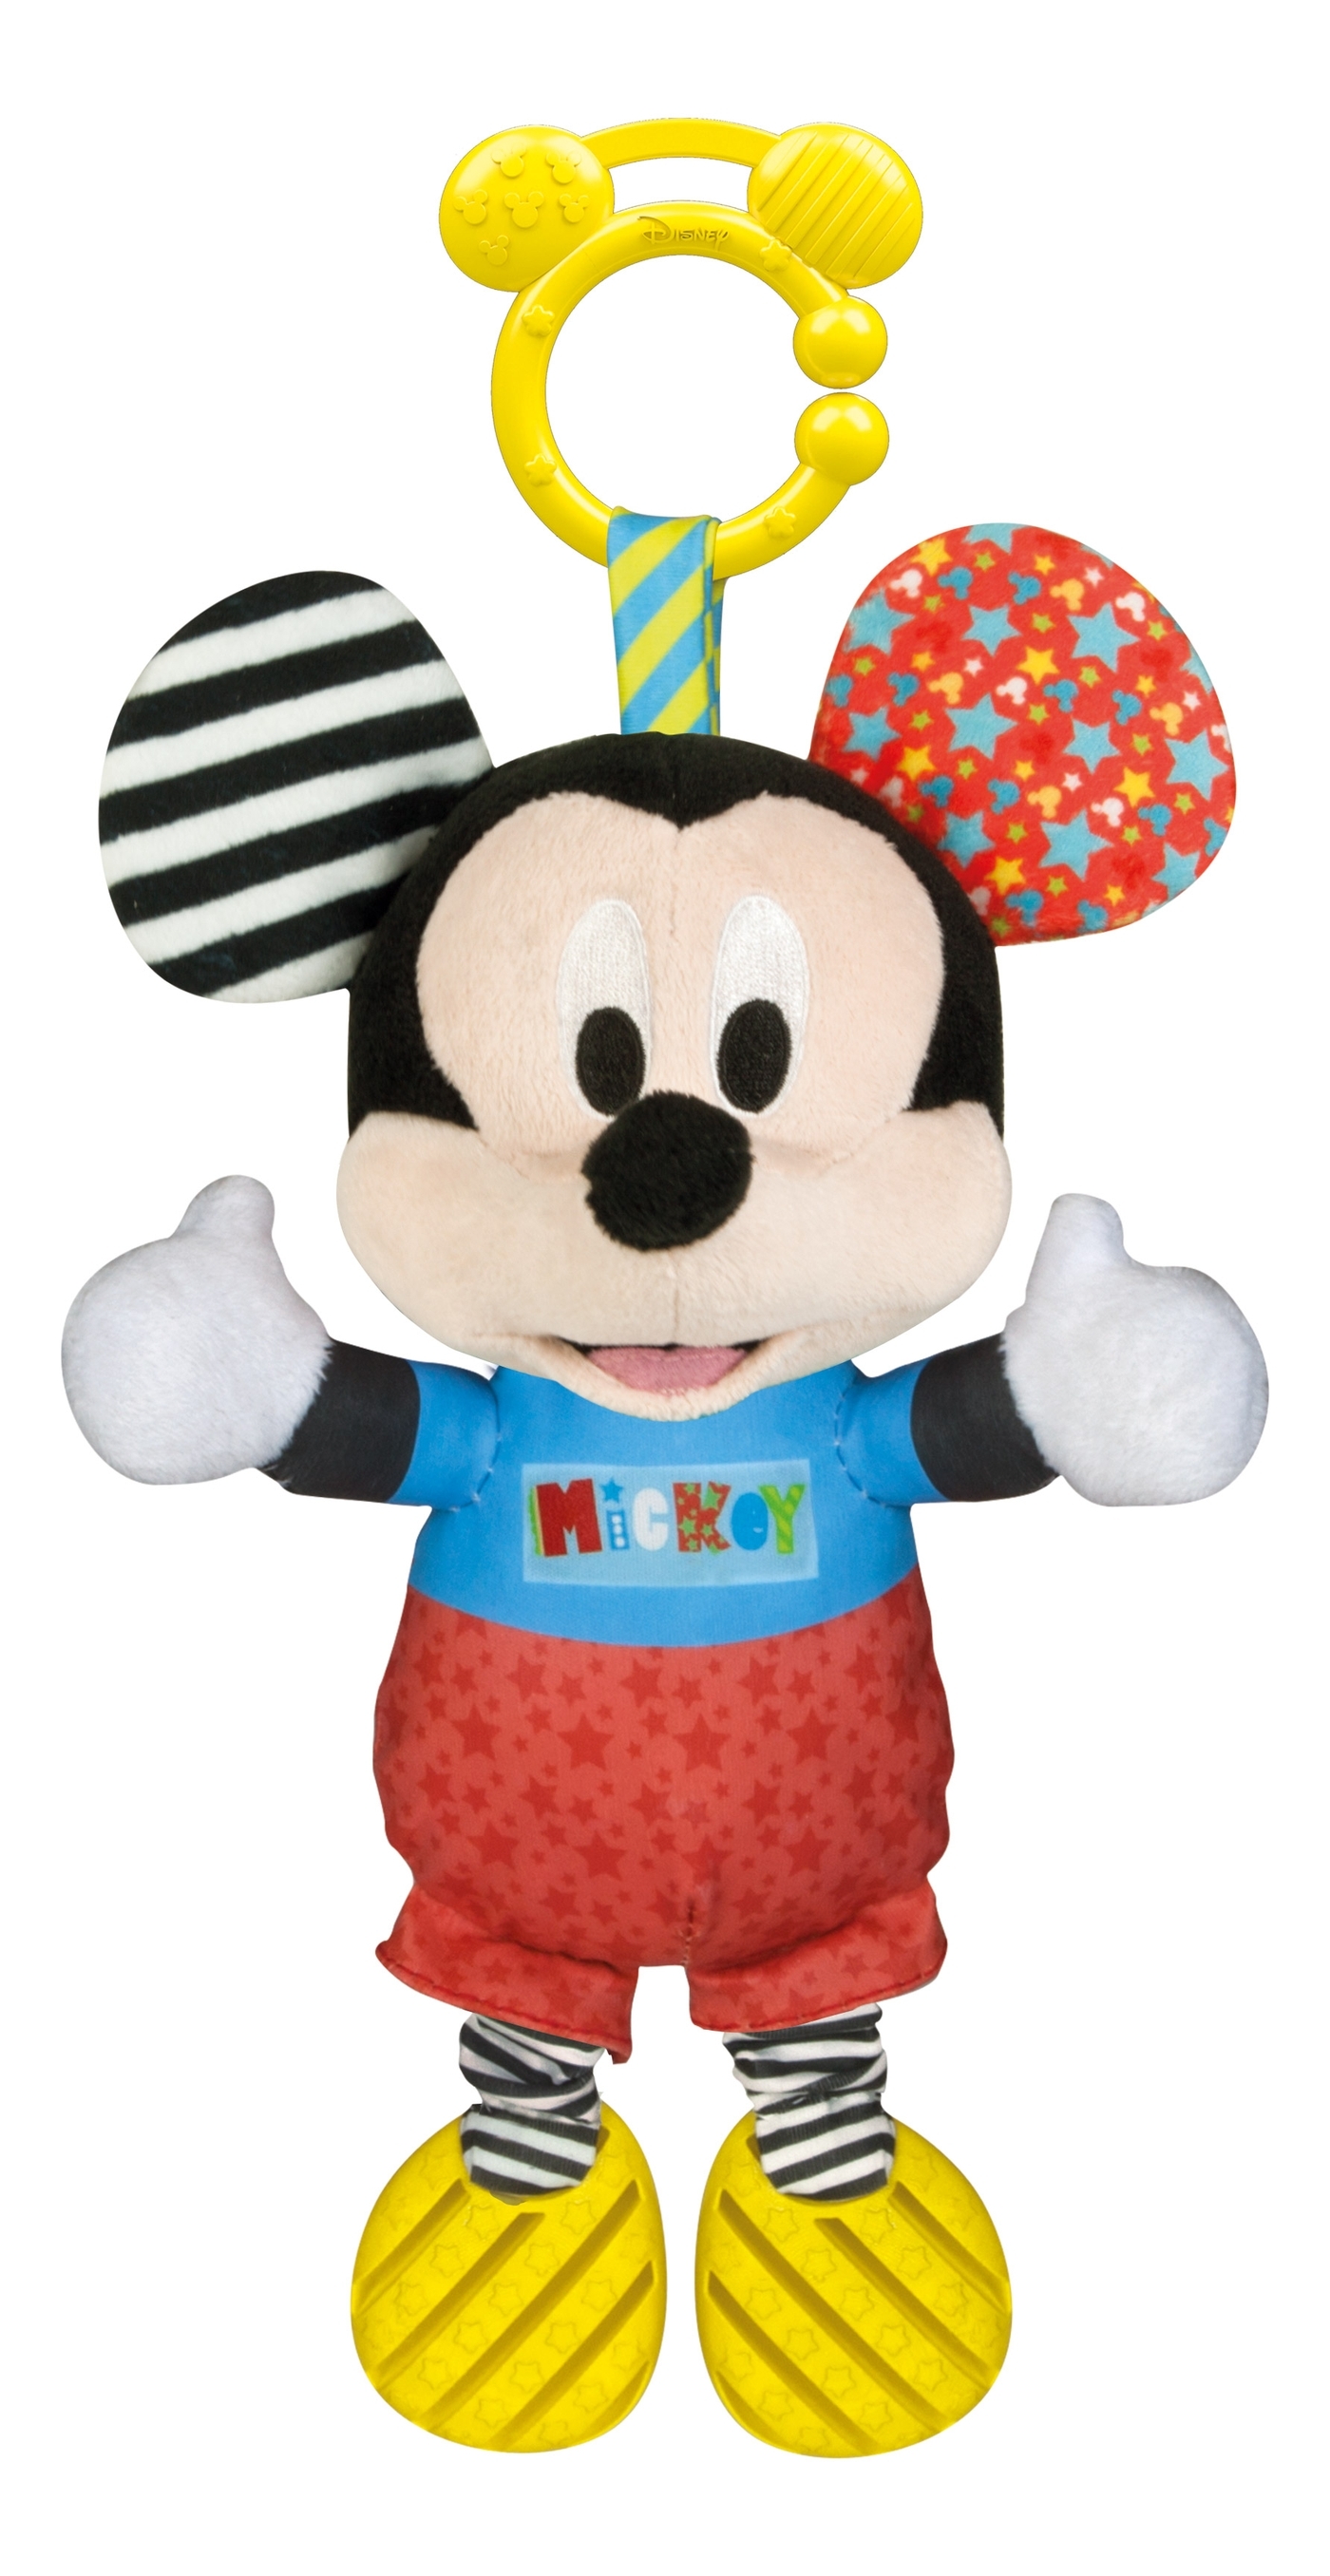 Clementoni Baby Mickey First Activities